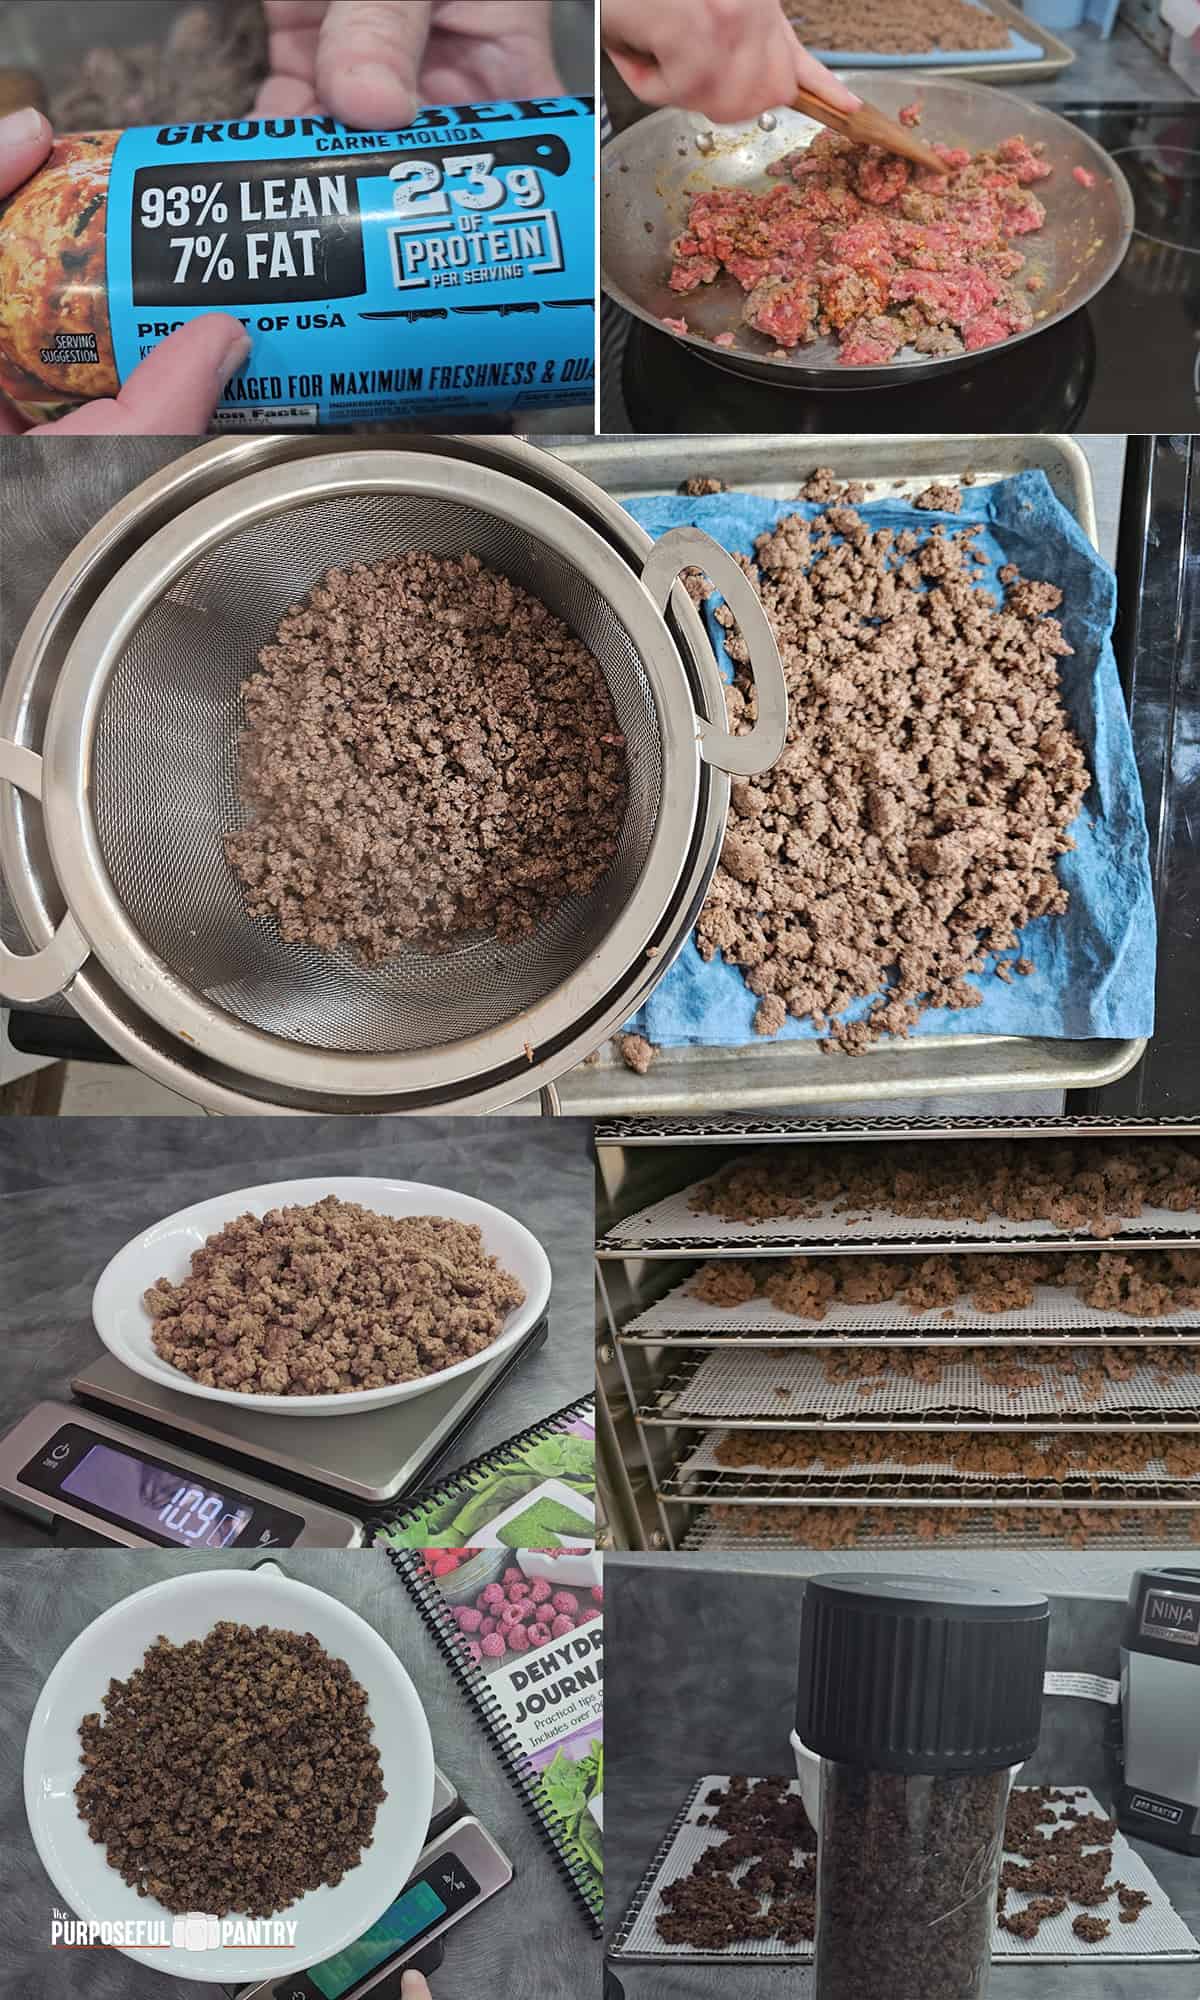 The step-by-step process of dehydrating ground beef from lean beef to cooking, weighing, dehydrating, and storing.